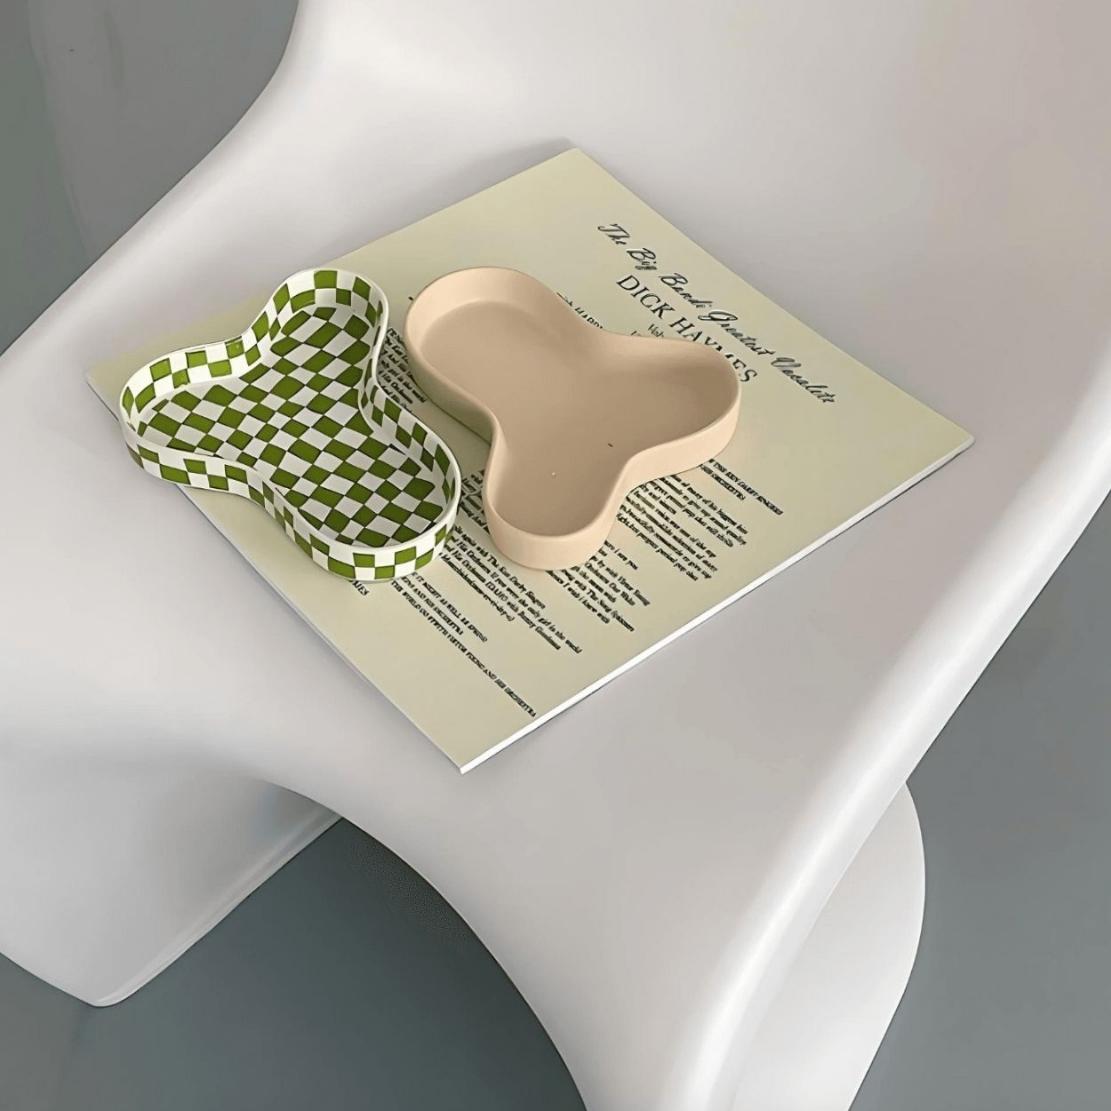 Asymmetrical pond shaped ceramic trays on chair / white green checkerboard / Beige